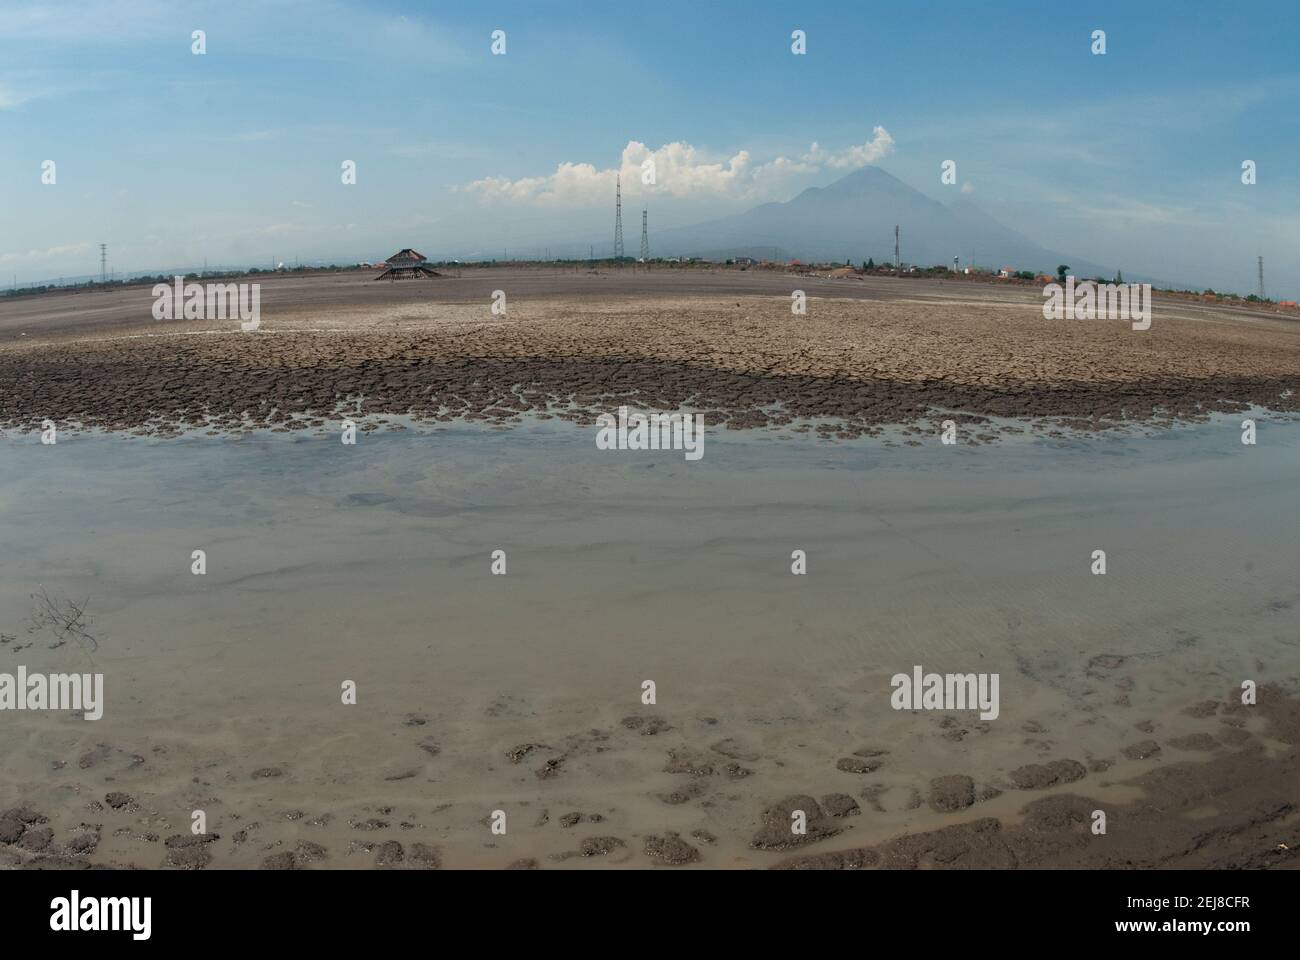 Mud lake geyser, environmental disaster which developed after drilling incident, Porong Sidoarjo, near Surabaya, East Java, Indonesia Stock Photo